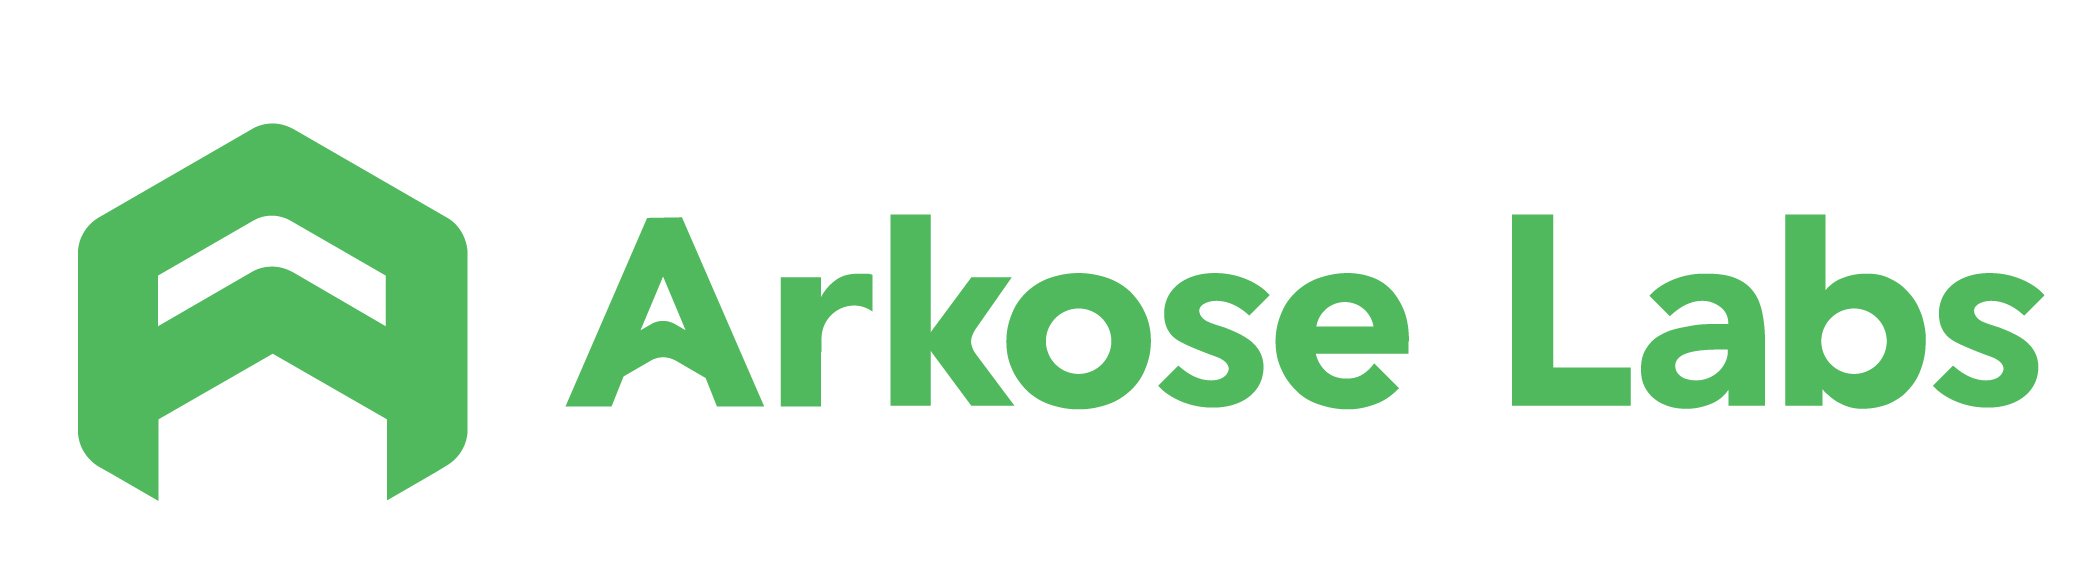 Arkose Labs_Silver